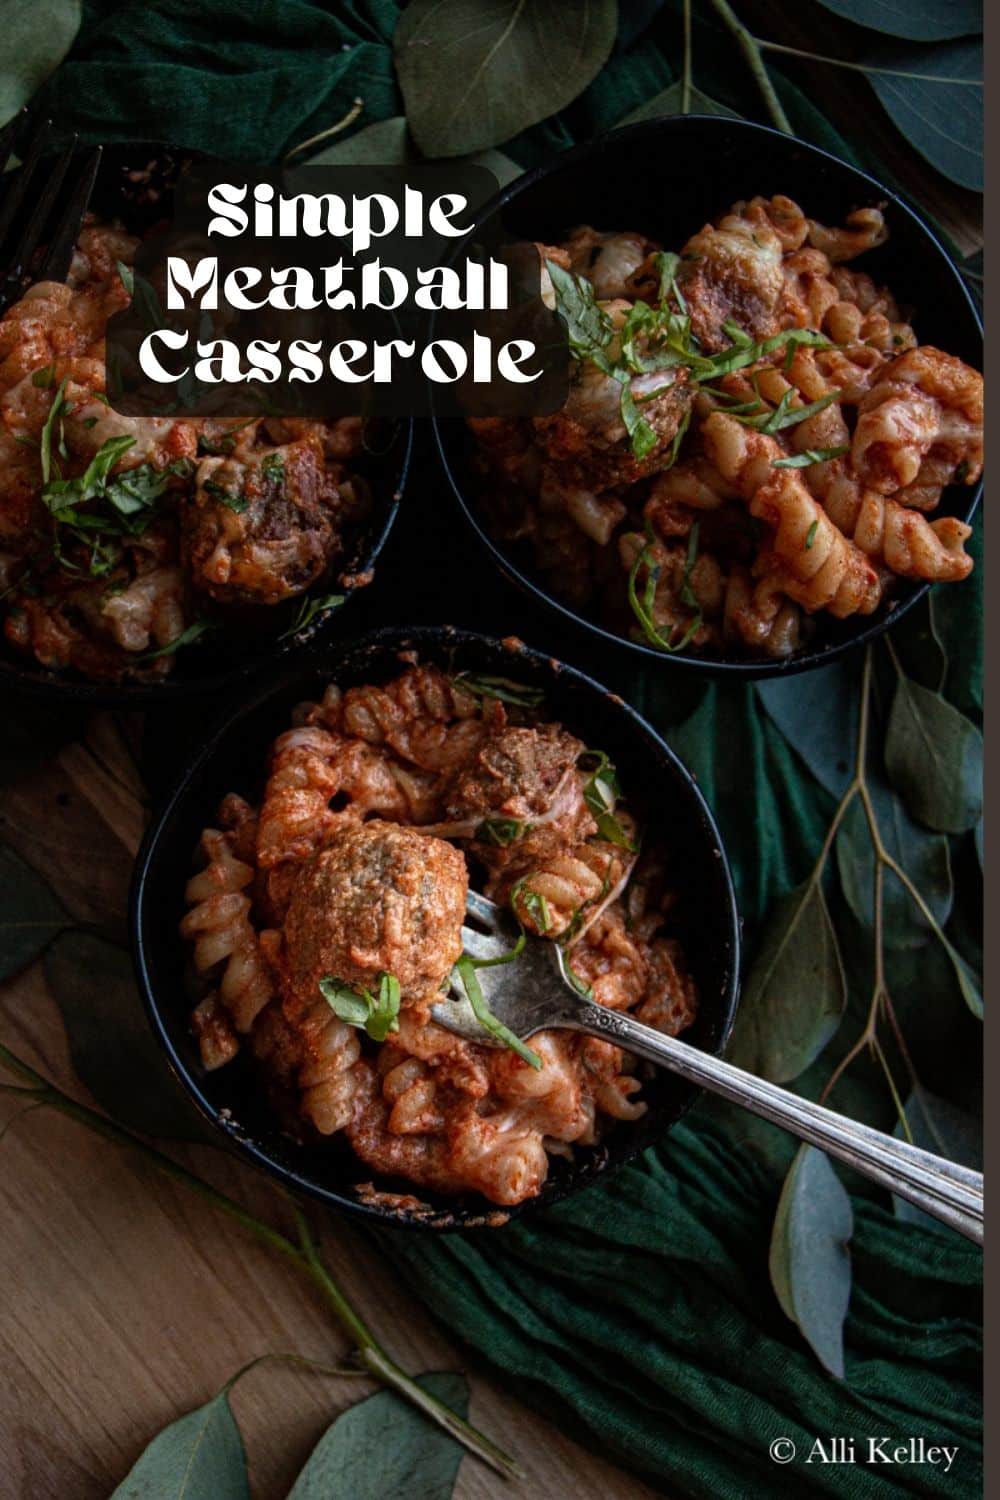 Are you looking for a comforting and satisfying mid-week meal? Then you just have to try my meatball casserole! This hearty and flavorful dish is a classic for good reason - you can't go wrong with tender meatballs, rich tomato sauce, and melted cheese. My meatball casserole is so simple to make, yet always a hit when served to family or friends!